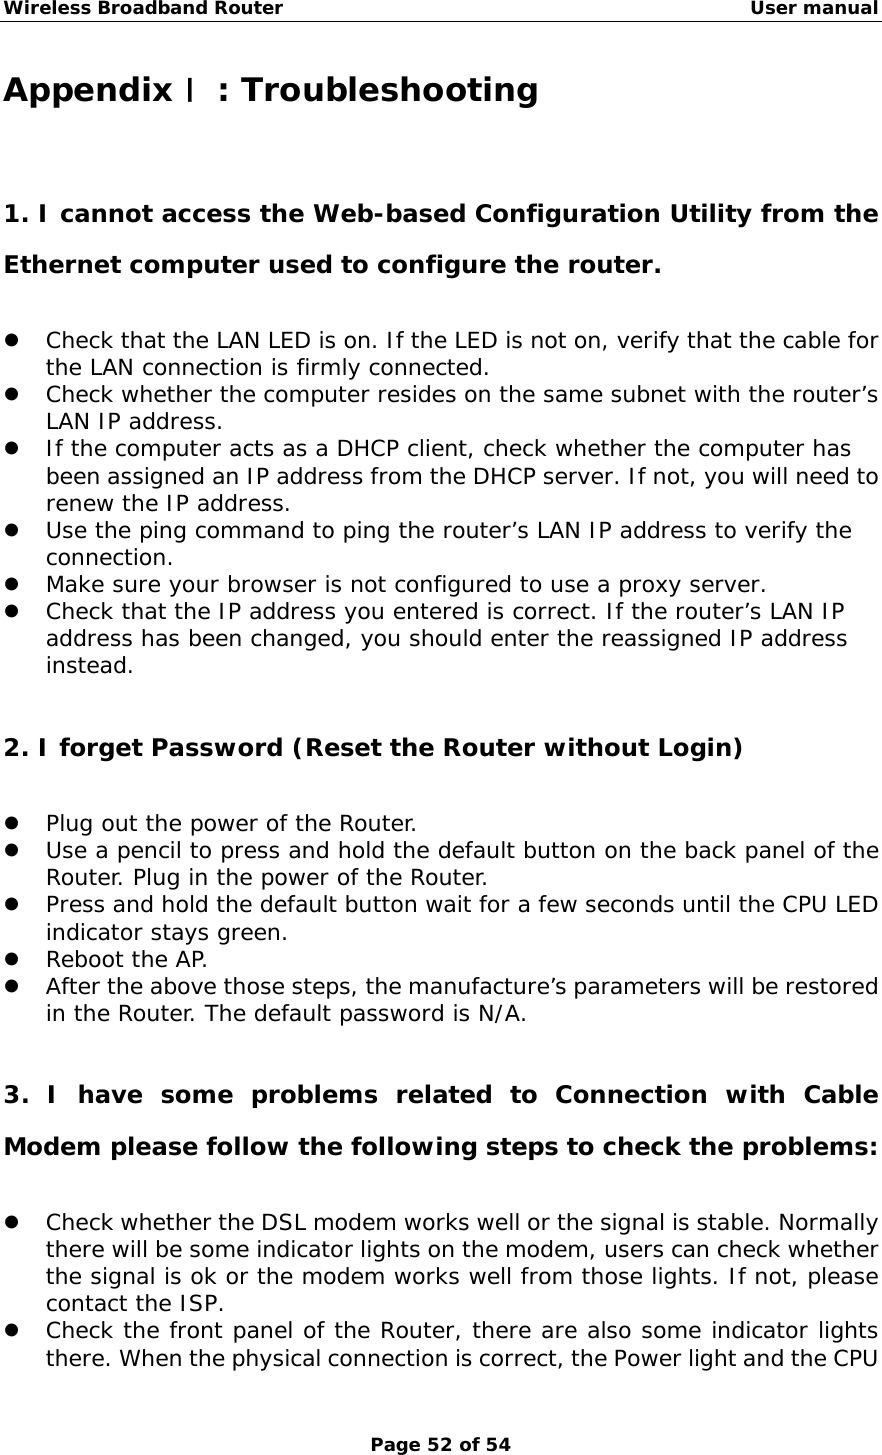 Wireless Broadband Router                                                   User manual Page 52 of 54 Appendix Ⅰ: Troubleshooting 1. I cannot access the Web-based Configuration Utility from the Ethernet computer used to configure the router. z Check that the LAN LED is on. If the LED is not on, verify that the cable for the LAN connection is firmly connected. z Check whether the computer resides on the same subnet with the router’s LAN IP address. z If the computer acts as a DHCP client, check whether the computer has been assigned an IP address from the DHCP server. If not, you will need to renew the IP address.  z Use the ping command to ping the router’s LAN IP address to verify the connection. z Make sure your browser is not configured to use a proxy server. z Check that the IP address you entered is correct. If the router’s LAN IP address has been changed, you should enter the reassigned IP address instead.  2. I forget Password (Reset the Router without Login) z Plug out the power of the Router. z Use a pencil to press and hold the default button on the back panel of the Router. Plug in the power of the Router.  z Press and hold the default button wait for a few seconds until the CPU LED indicator stays green. z Reboot the AP. z After the above those steps, the manufacture’s parameters will be restored in the Router. The default password is N/A.  3. I have some problems related to Connection with Cable Modem please follow the following steps to check the problems: z Check whether the DSL modem works well or the signal is stable. Normally there will be some indicator lights on the modem, users can check whether the signal is ok or the modem works well from those lights. If not, please contact the ISP. z Check the front panel of the Router, there are also some indicator lights there. When the physical connection is correct, the Power light and the CPU 